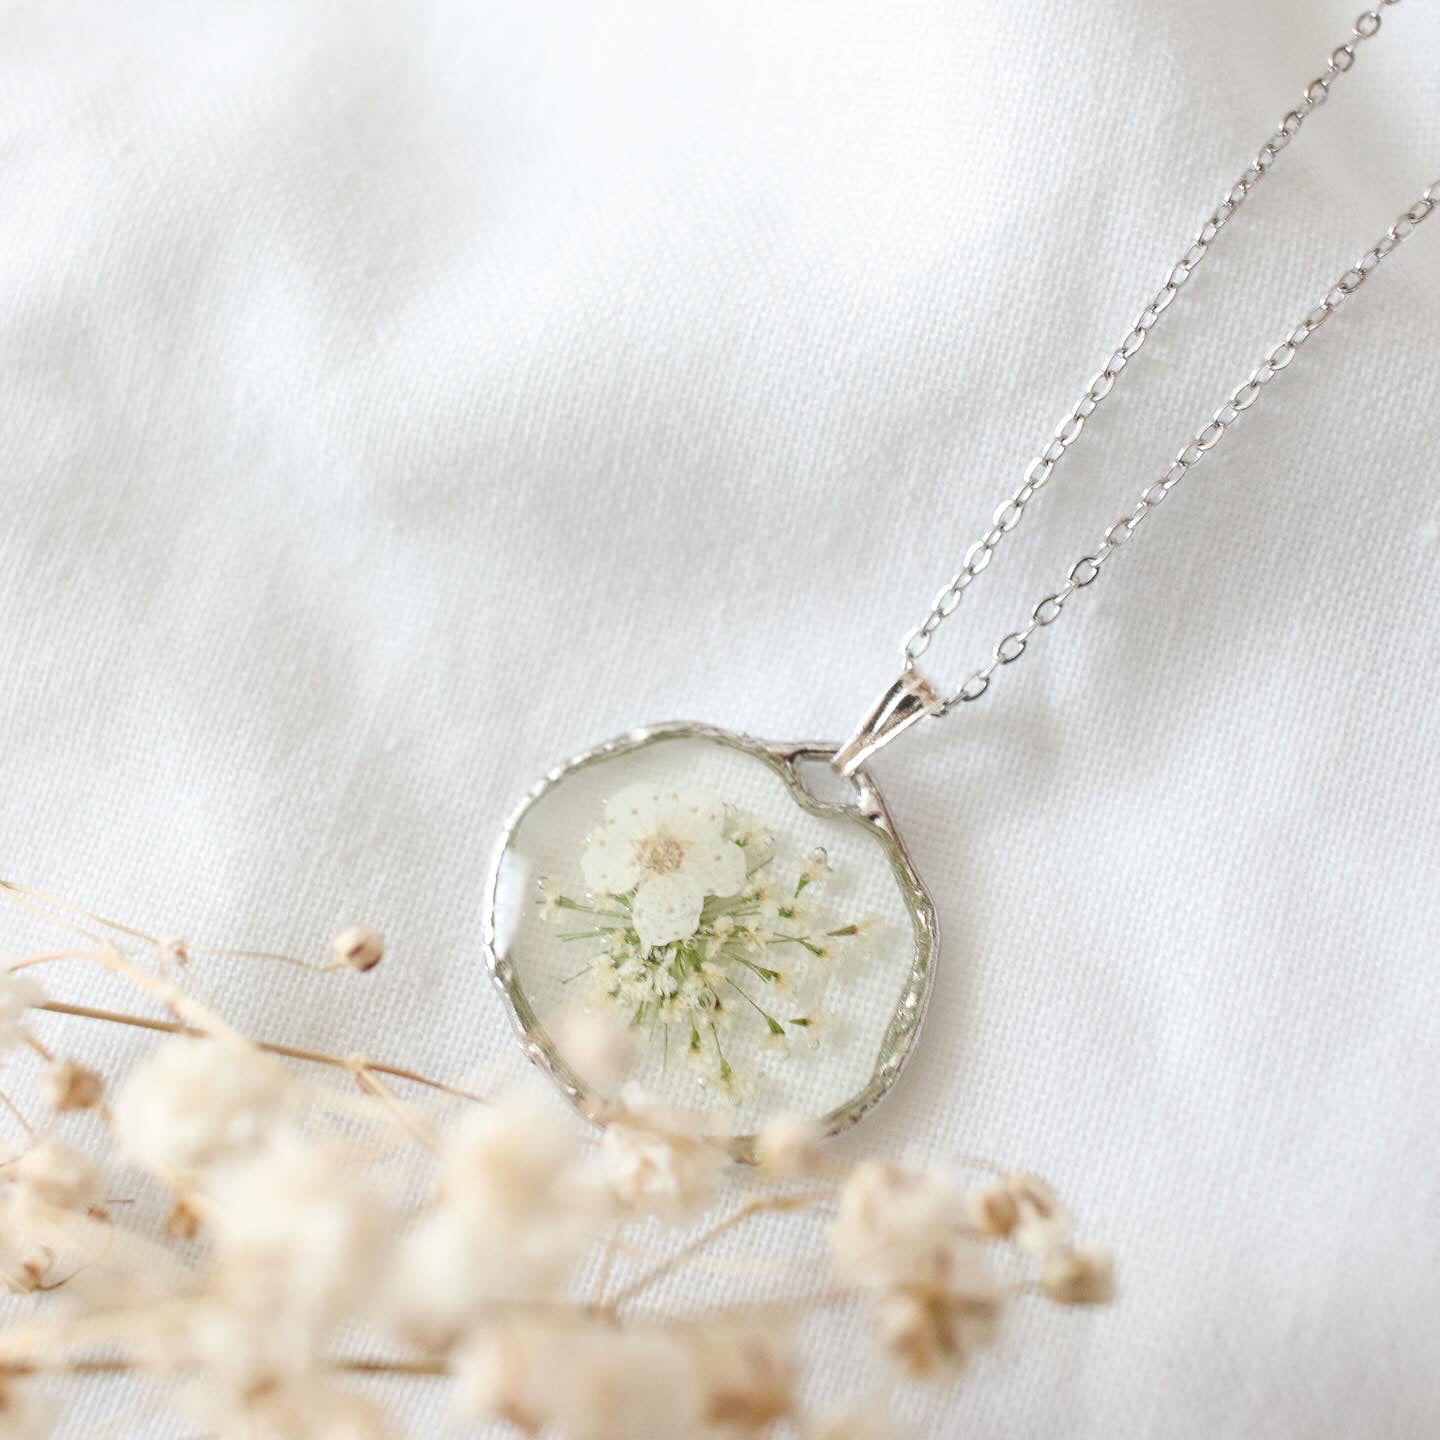 The Trouvaille White Narcissus Necklace in Silver